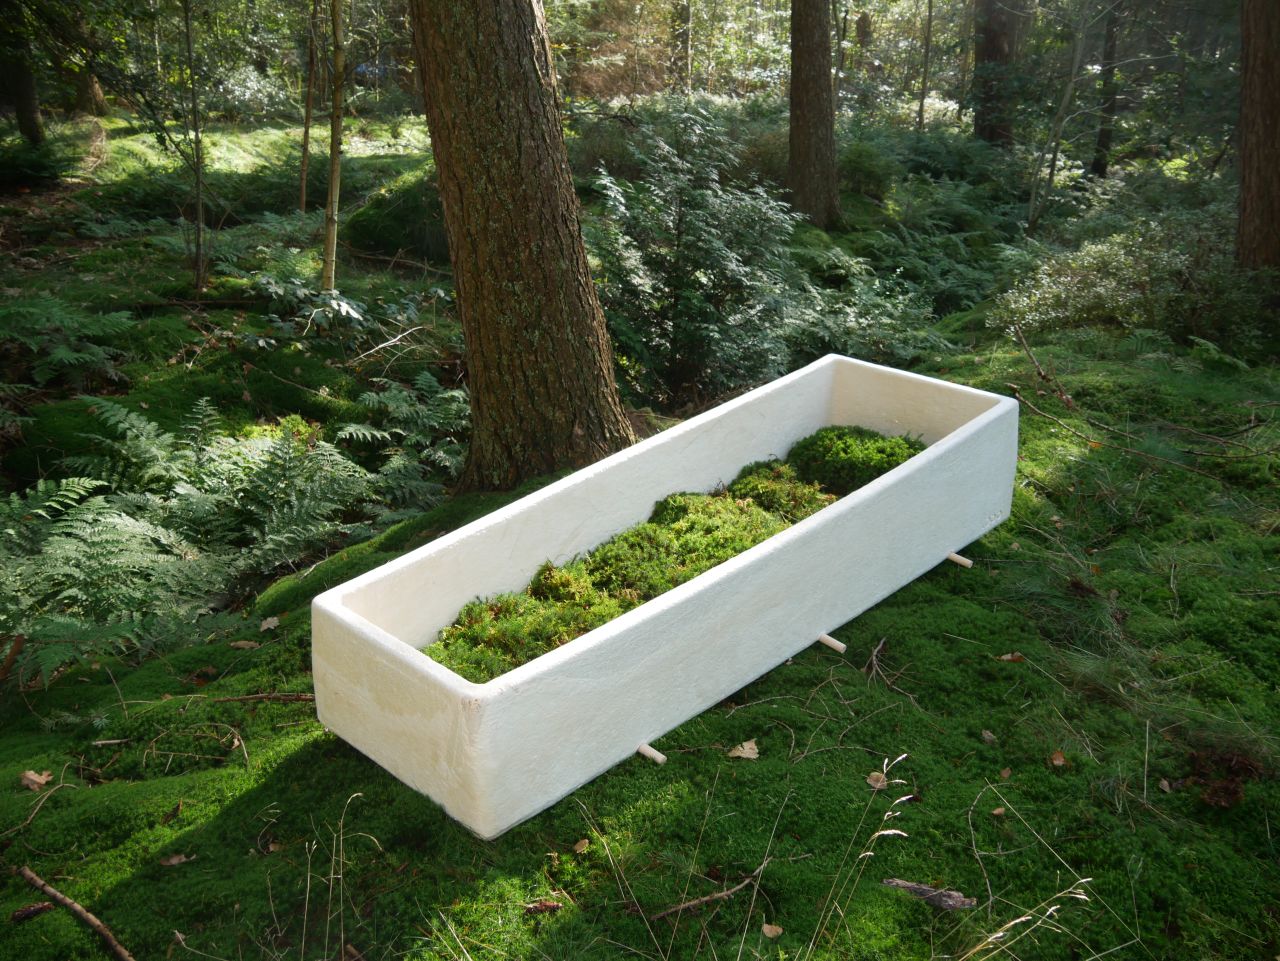 This "living cocoon" coffin, created by Dutch company Loop, is made from mycelium -- fungal fibers that usually live underground but can be cultivated in a laboratory.